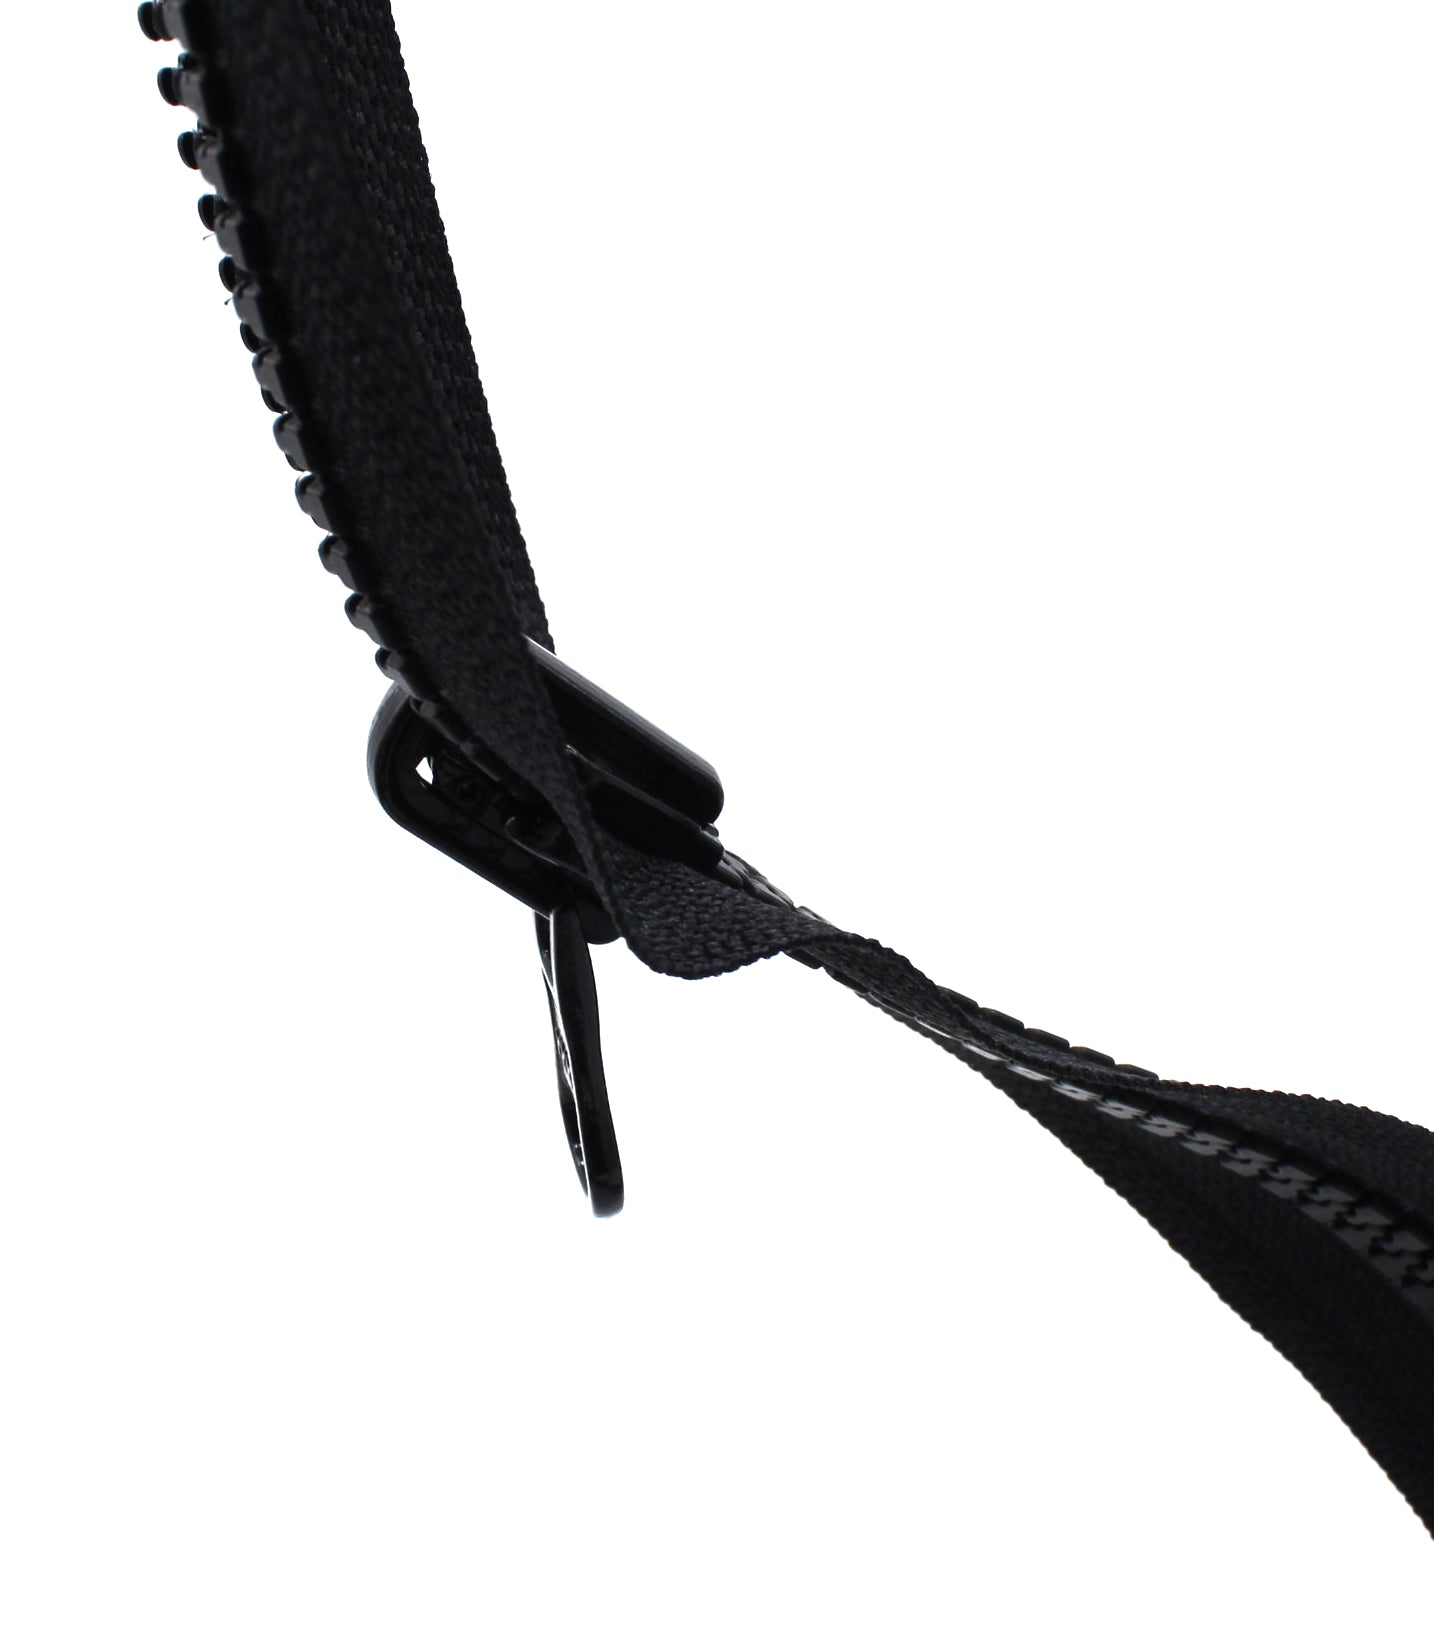 5 Heavy Duty Zipper – Separating Plastic Zipper with Double Pull